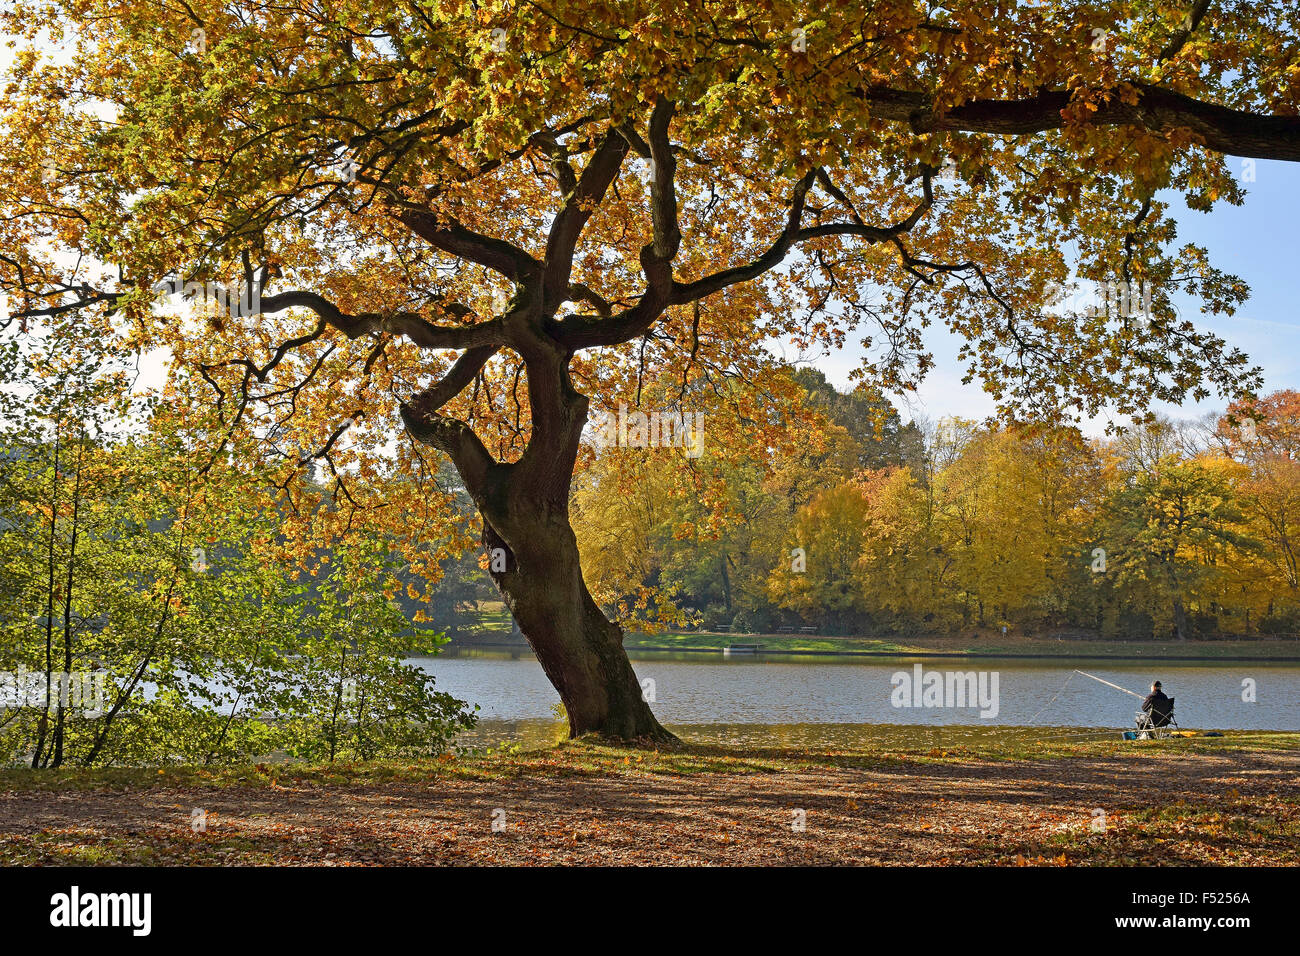 Indian summer, colorful trees in autumn, lake and fishing man Stock Photo